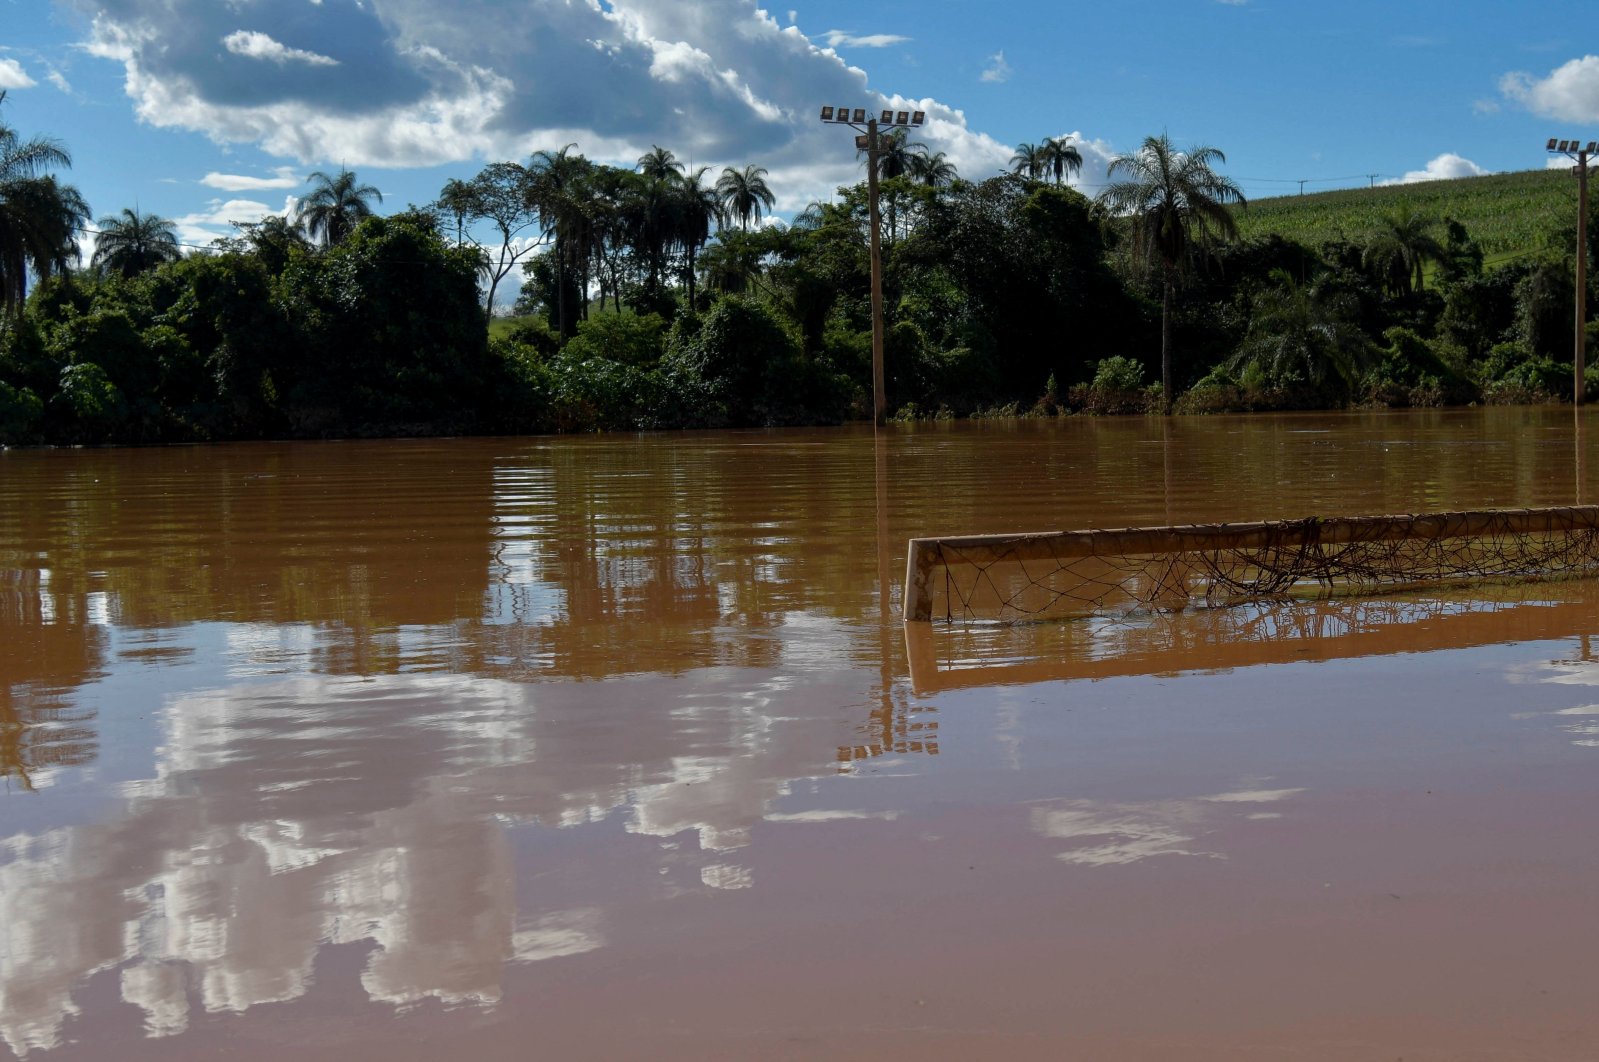 A goal post is seen at a flooded soccer field after rains in Mario Campos, in Minas Gerais state, Brazil, Jan. 12, 2022. (Reuters Photo)